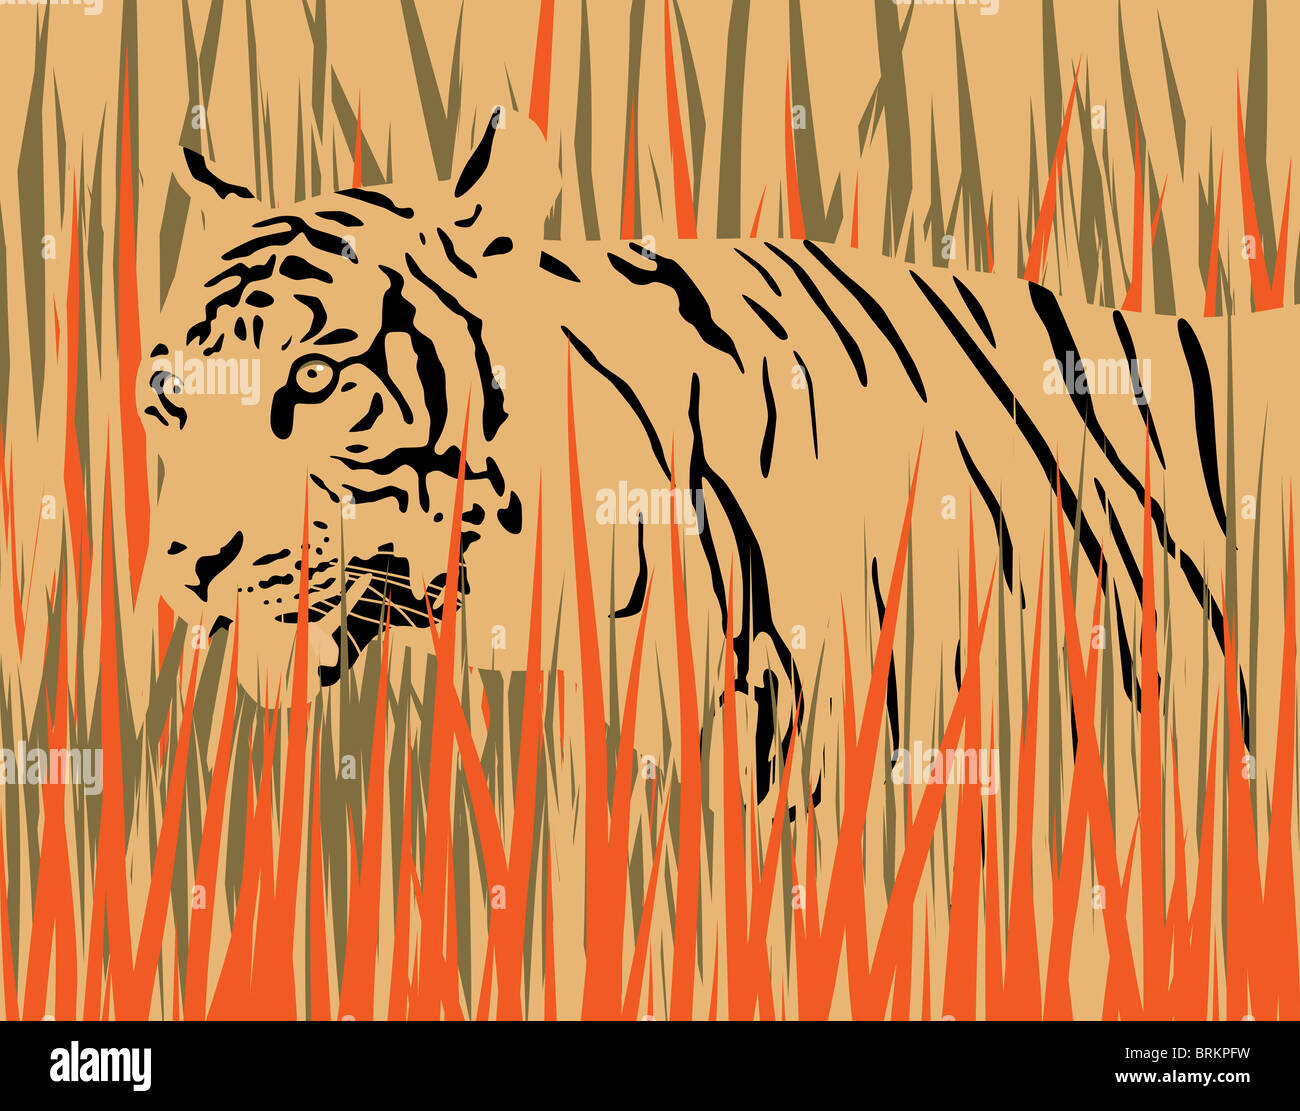 Illustration of a tiger in dry grass Stock Photo